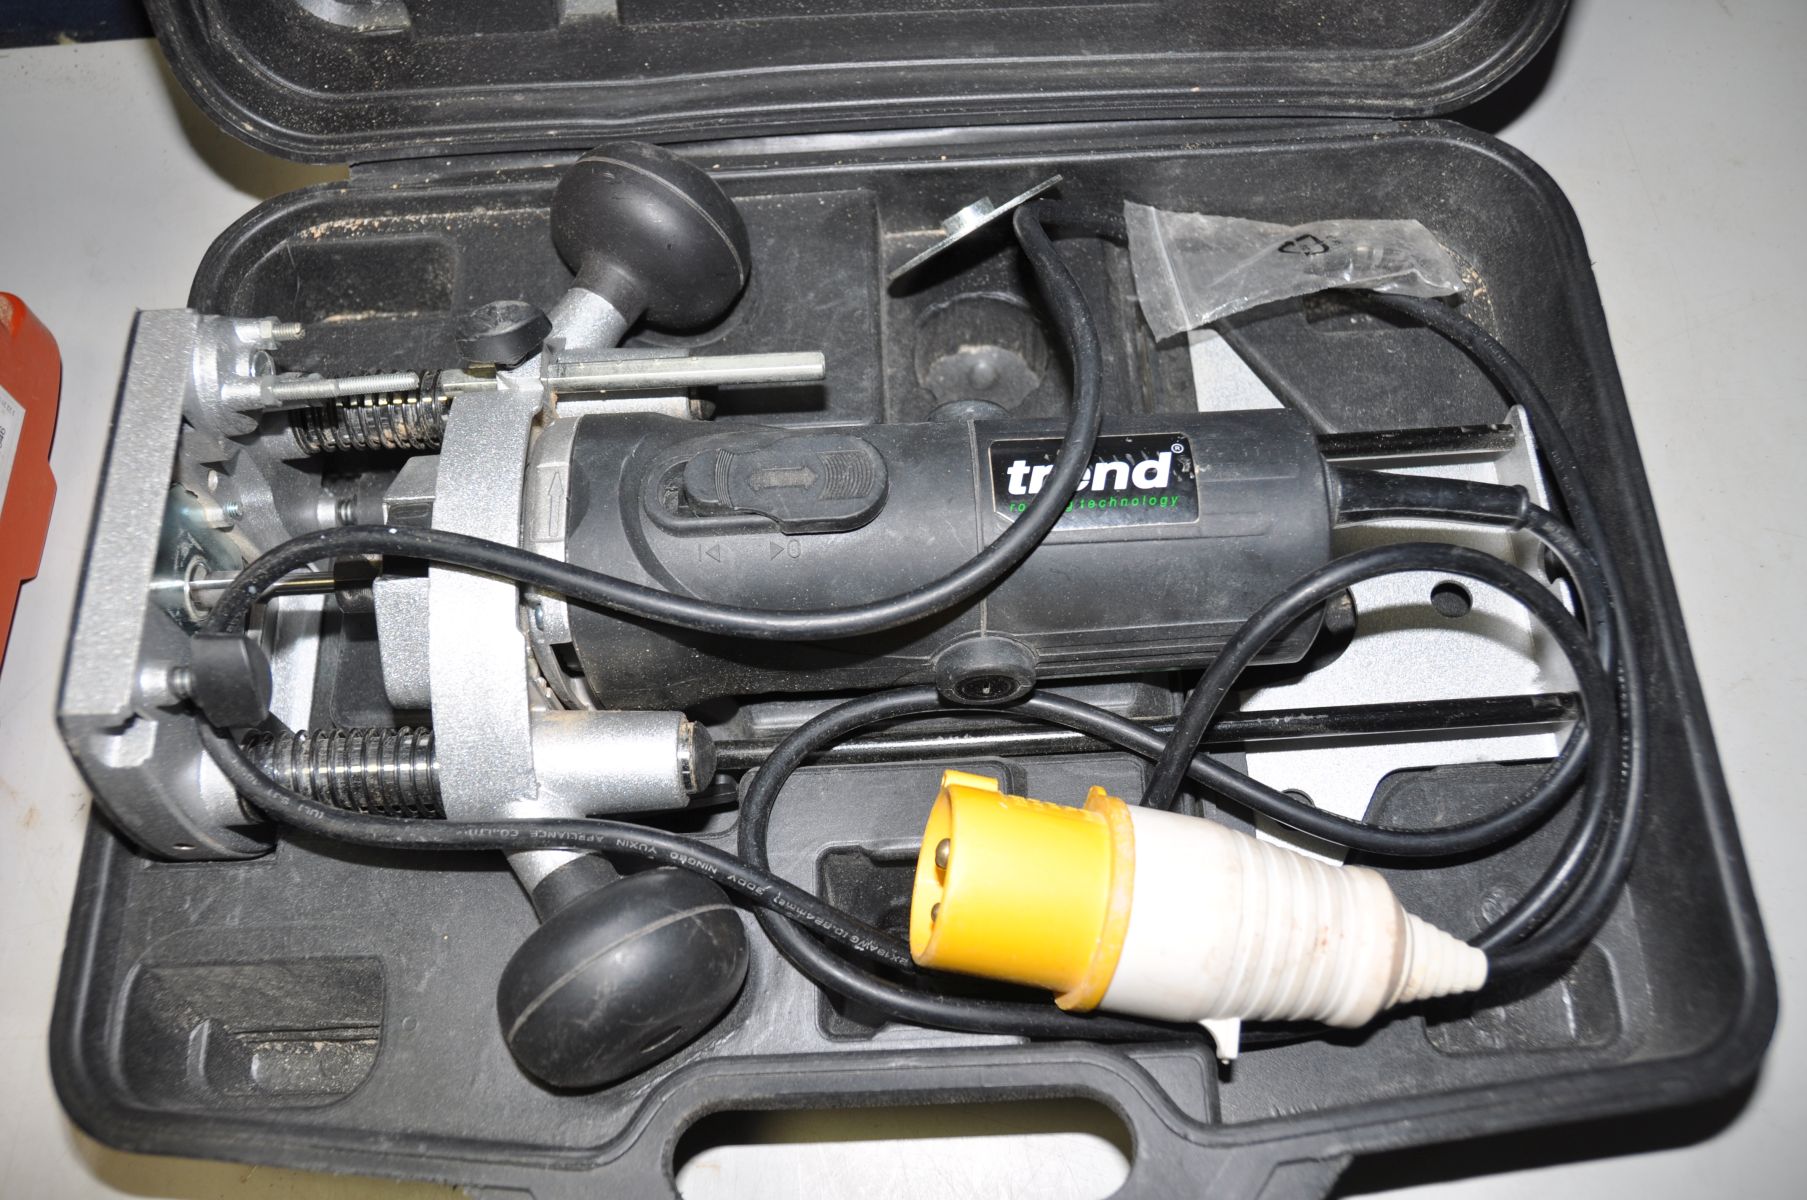 A FEIN MULTIMASTER FMM250Q 110v multi tool with attachments in case, 110v extension cord and a cased - Image 5 of 5